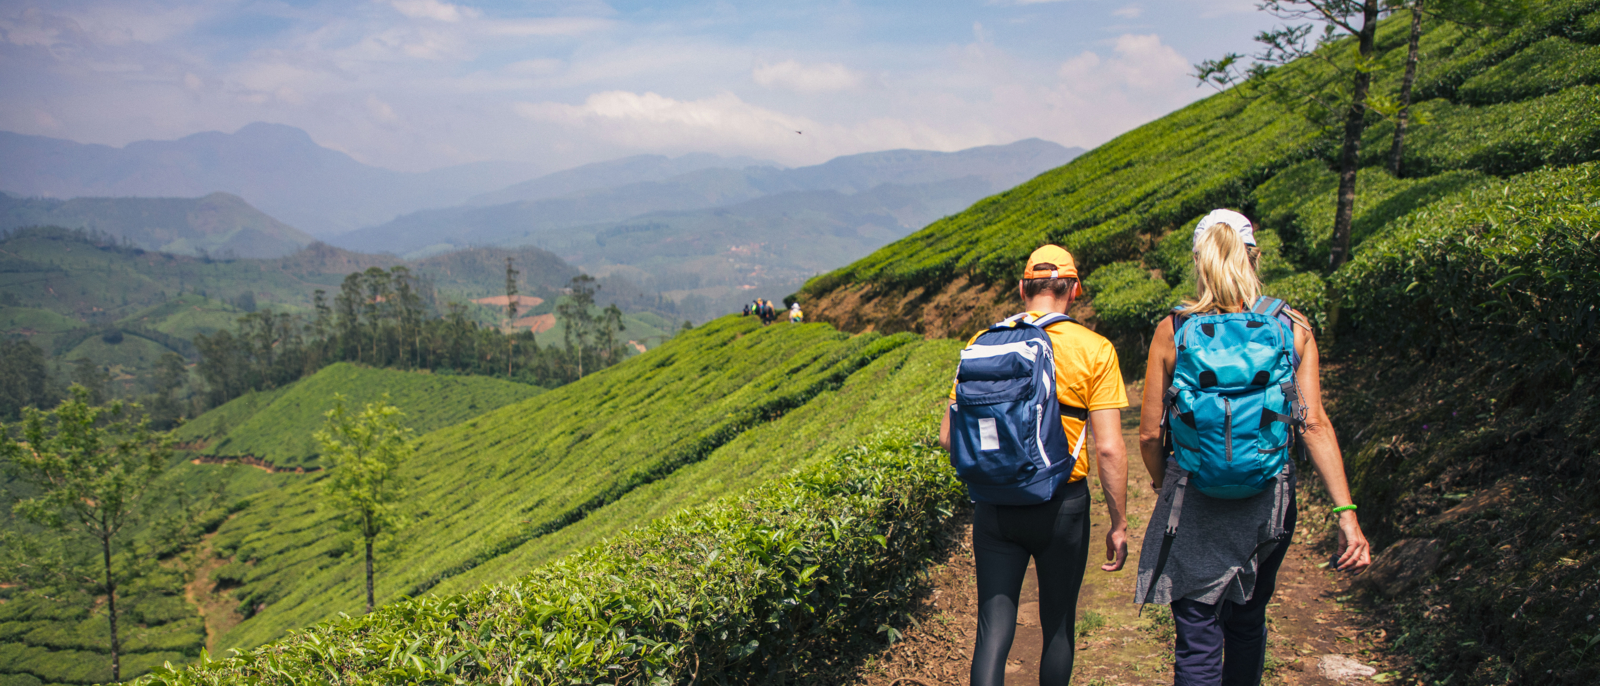 Rear view of two hikers walking through the tea plantations in the Letchi Hills in Munnar, India.